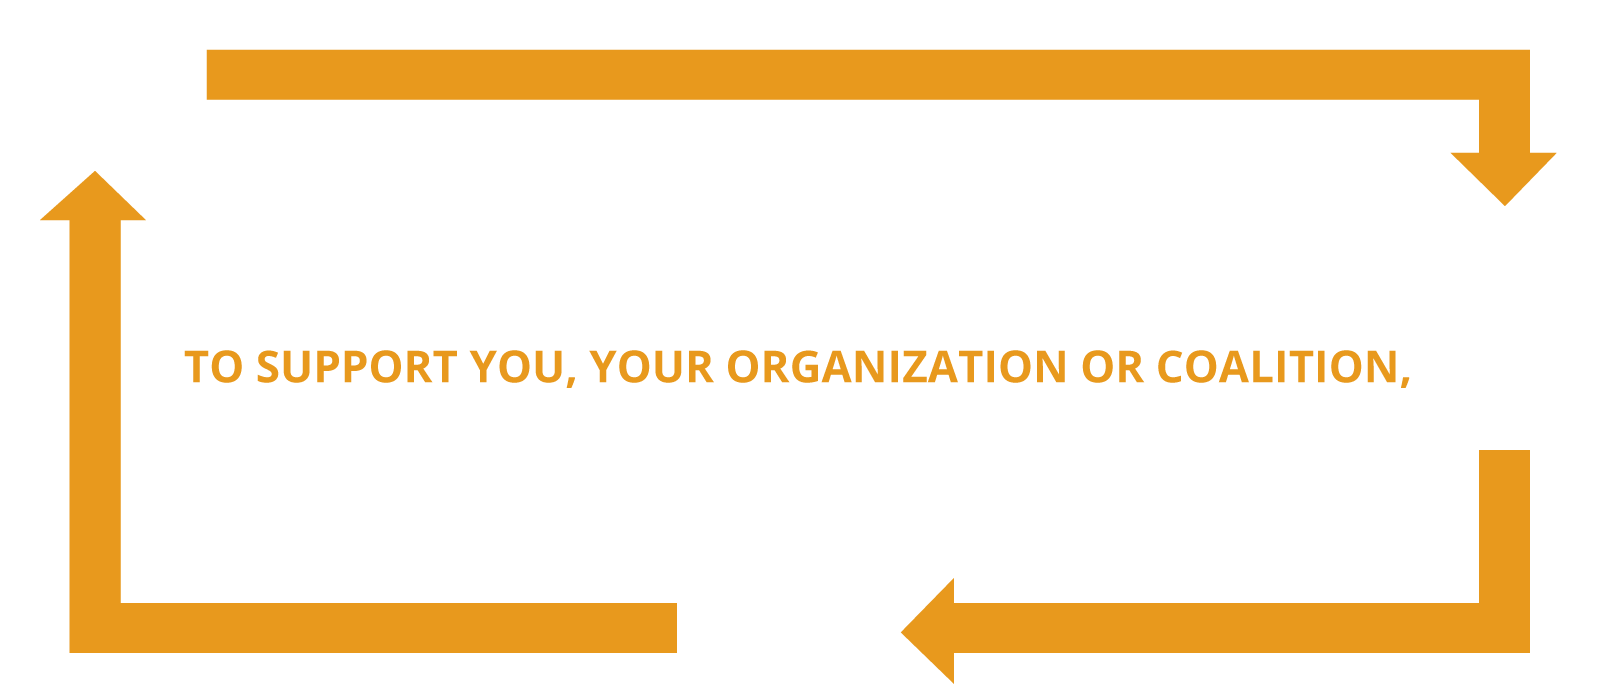 Drugged Driving Resources